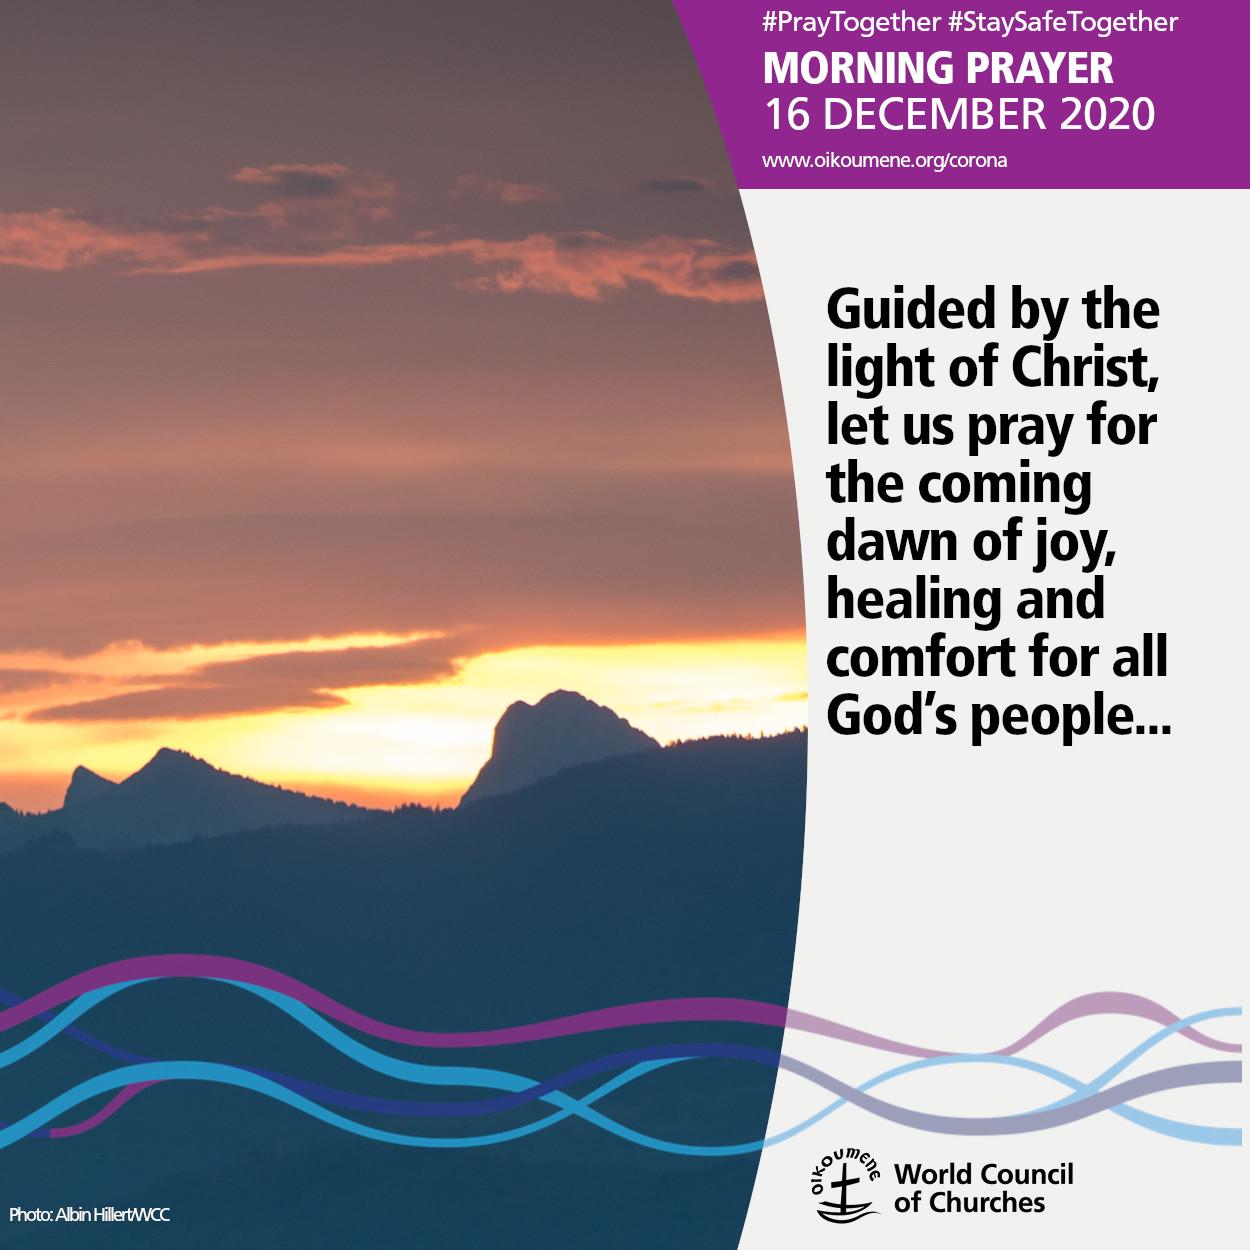 Guided by the light of Christ, let us pray for the coming dawn of joy, healing and comfort for all God’s people...